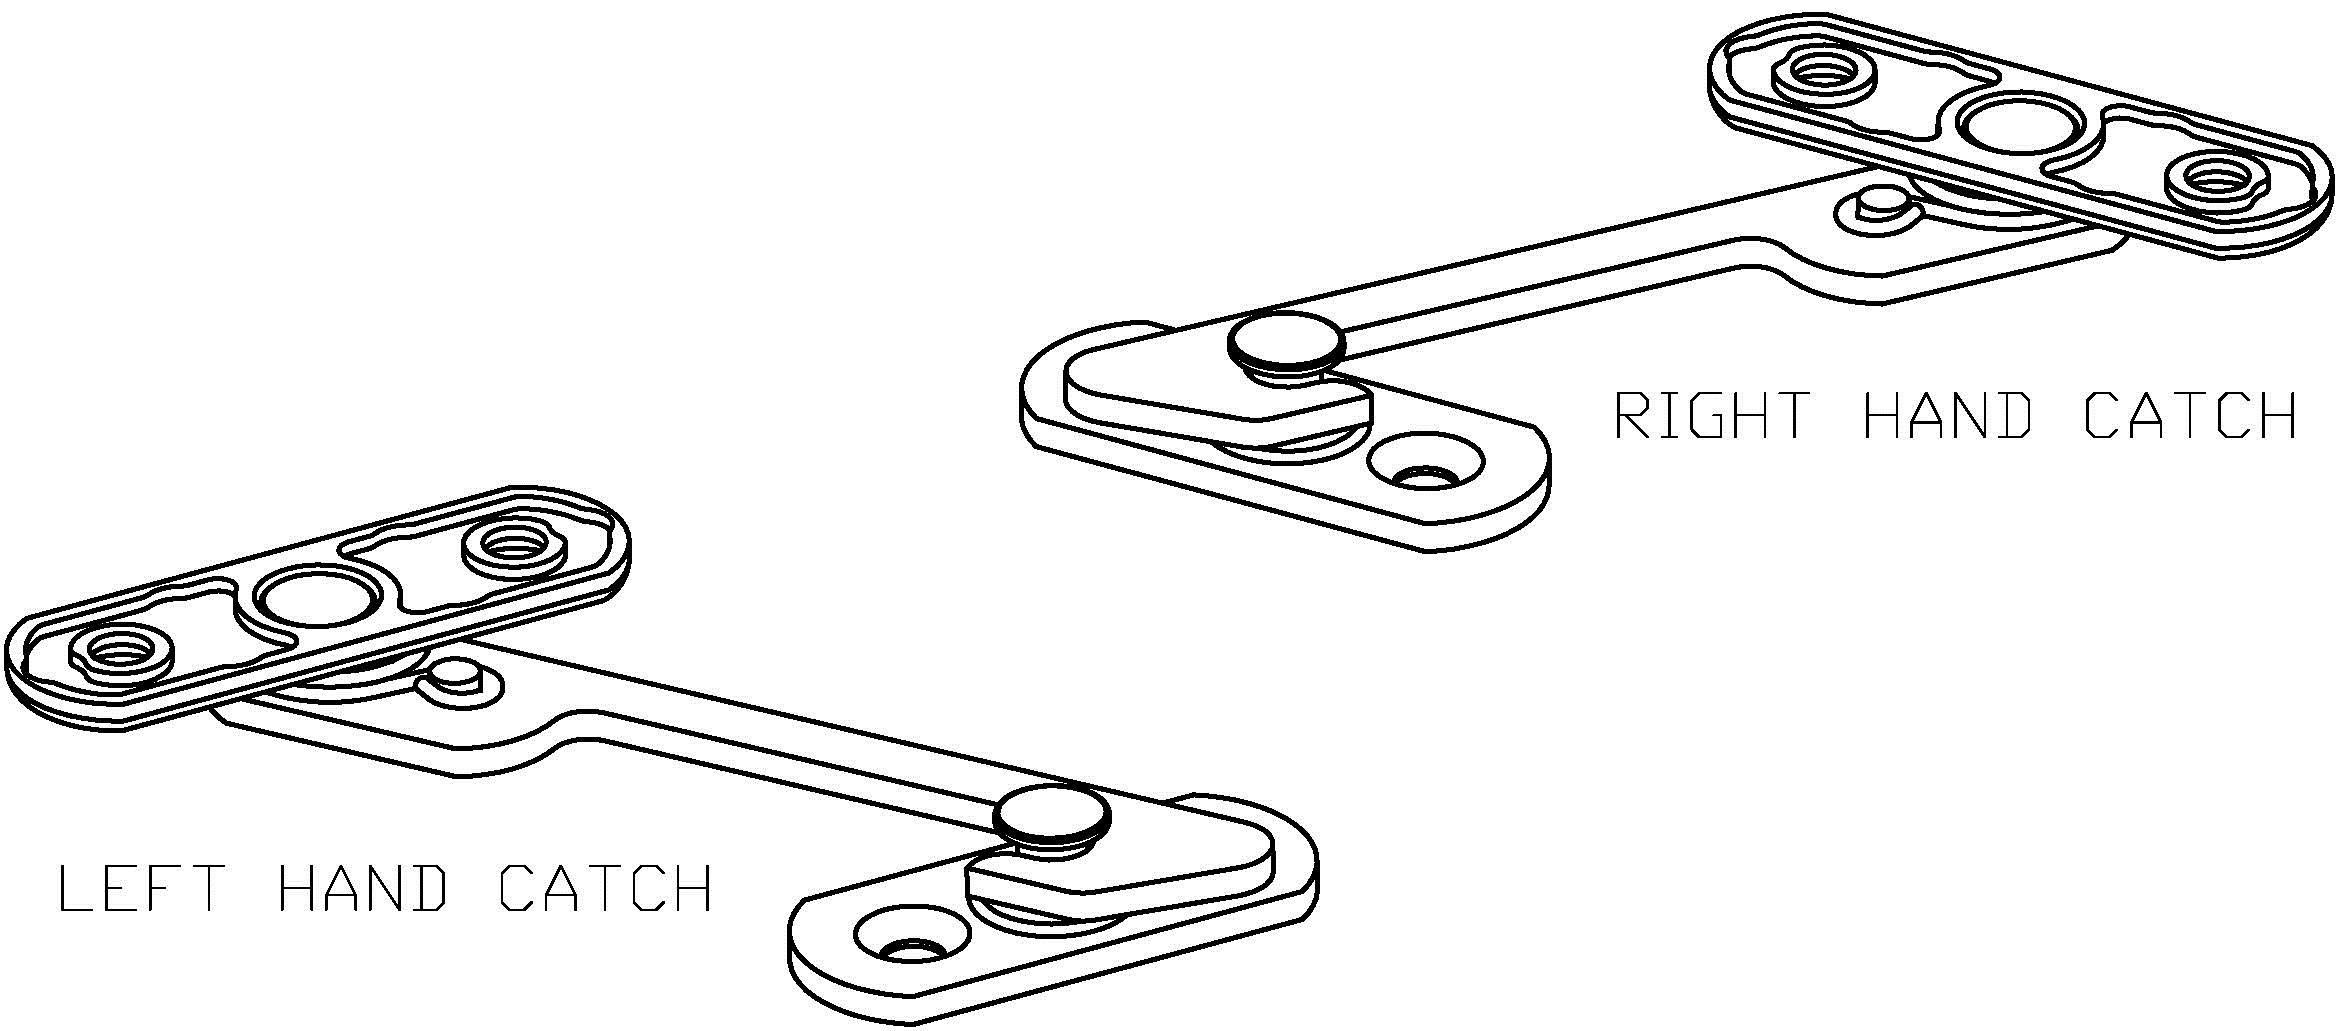 D64 Restrictor Safety Catch Handing drawing jpeg